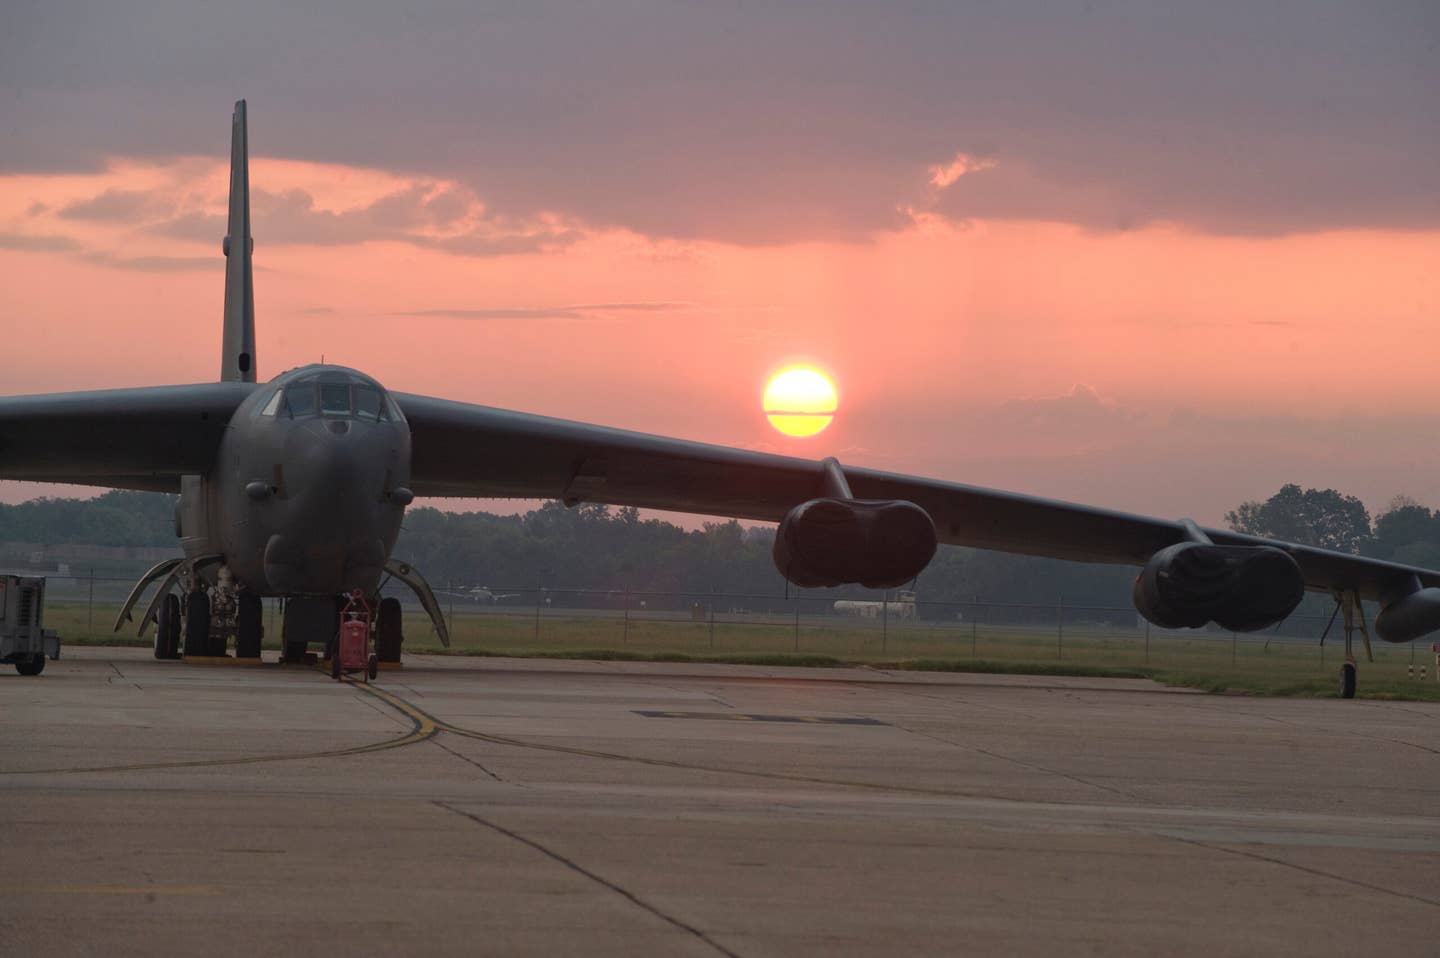 The sun rises behind a B-52H Stratofortress on the flight line of Barksdale Air Force Base, La., July 27. The B-52 is capable of flying 7,652 nautical miles or 8,800 miles without being refueled by another aircraft. The BUFF is classified as a long-range, heavy bomber and is capable of carrying 70,000 pounds of mixed ordnance. (U.S. Air Force photo/Airman 1st Class Micaiah Anthony)(RELEASED)